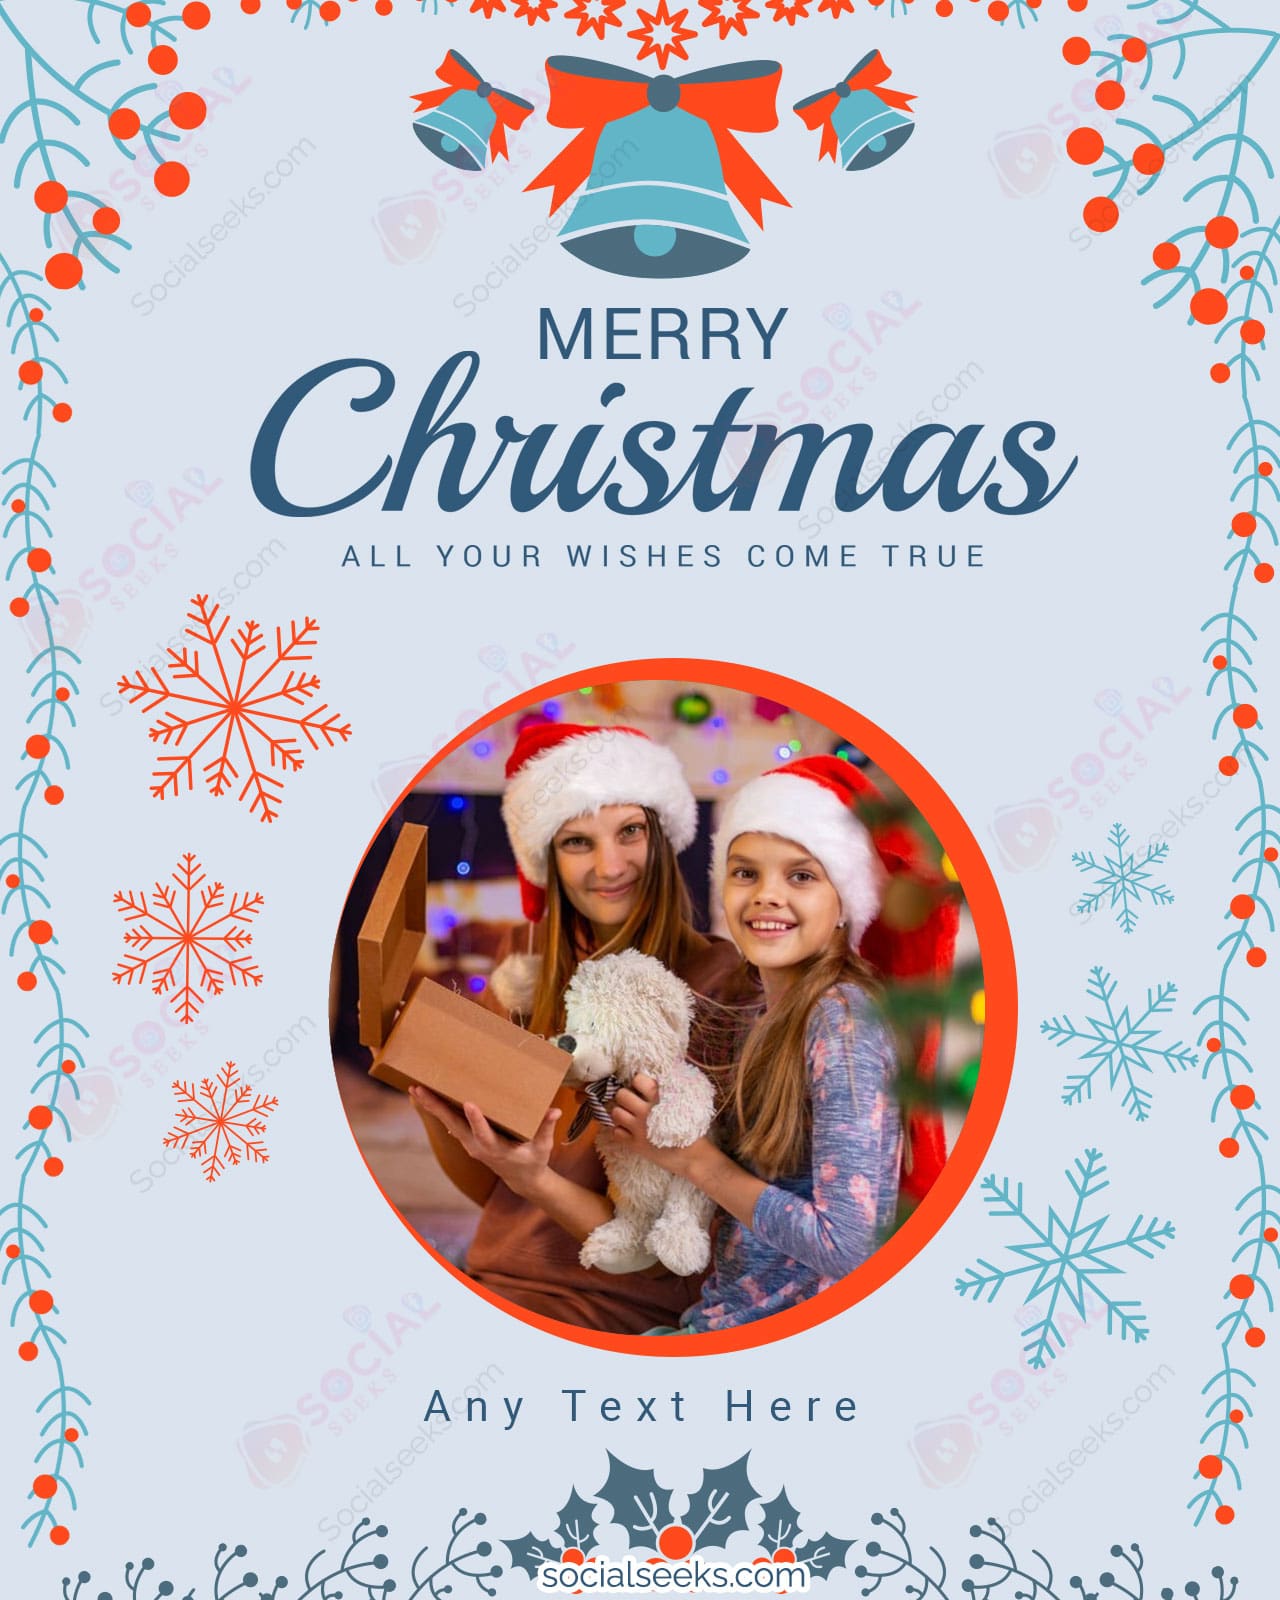 Christmas And New Year Wishes Greeting Card With Photo & Name